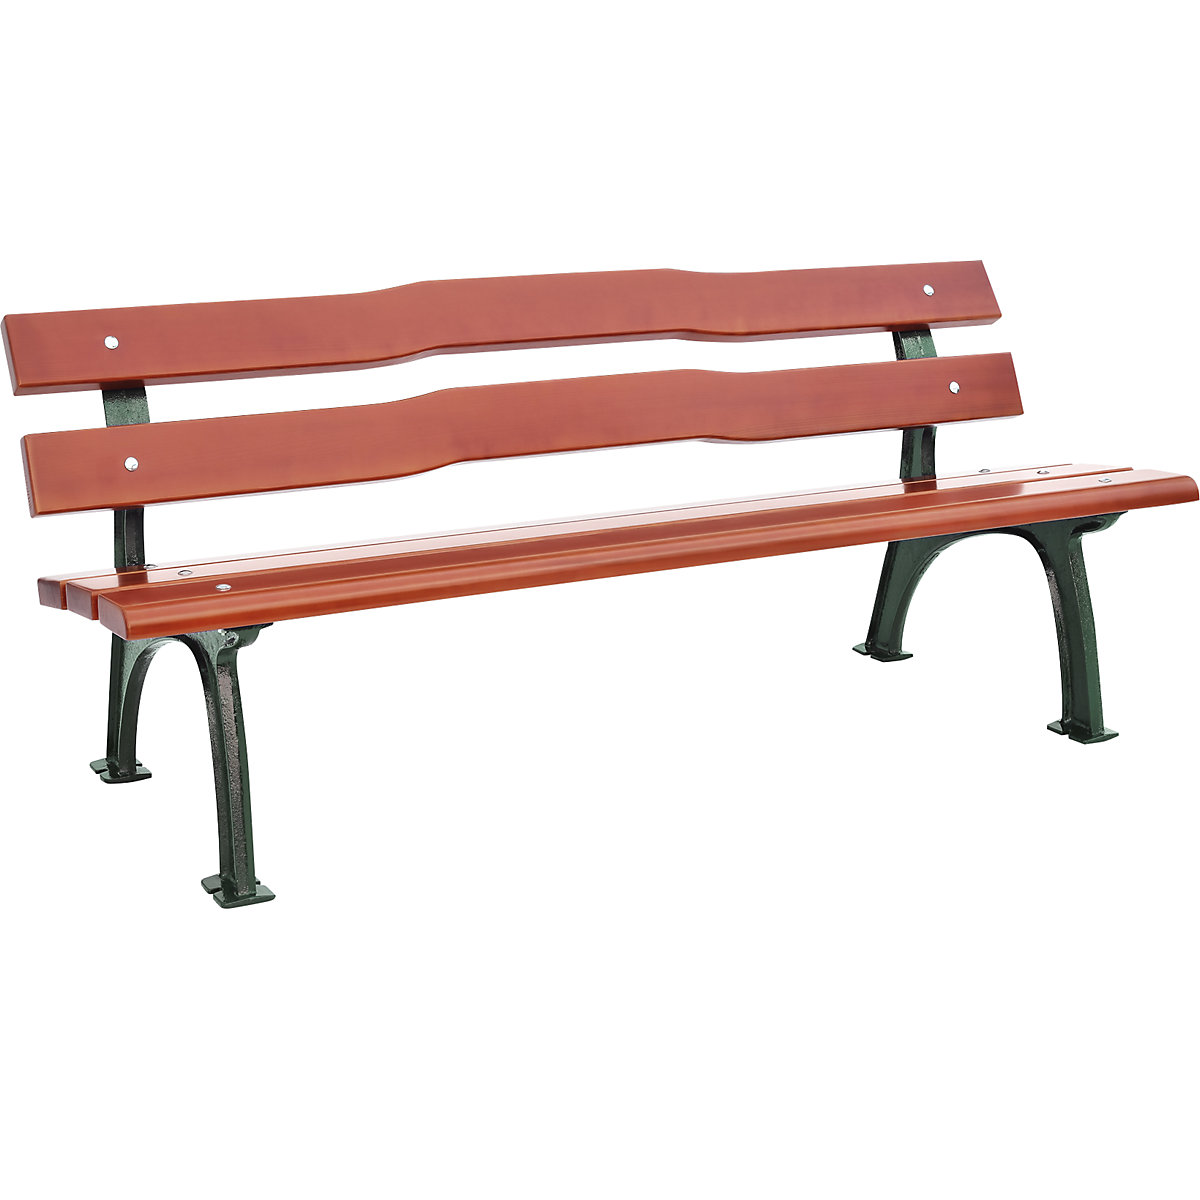 Park bench, solid cast iron frame